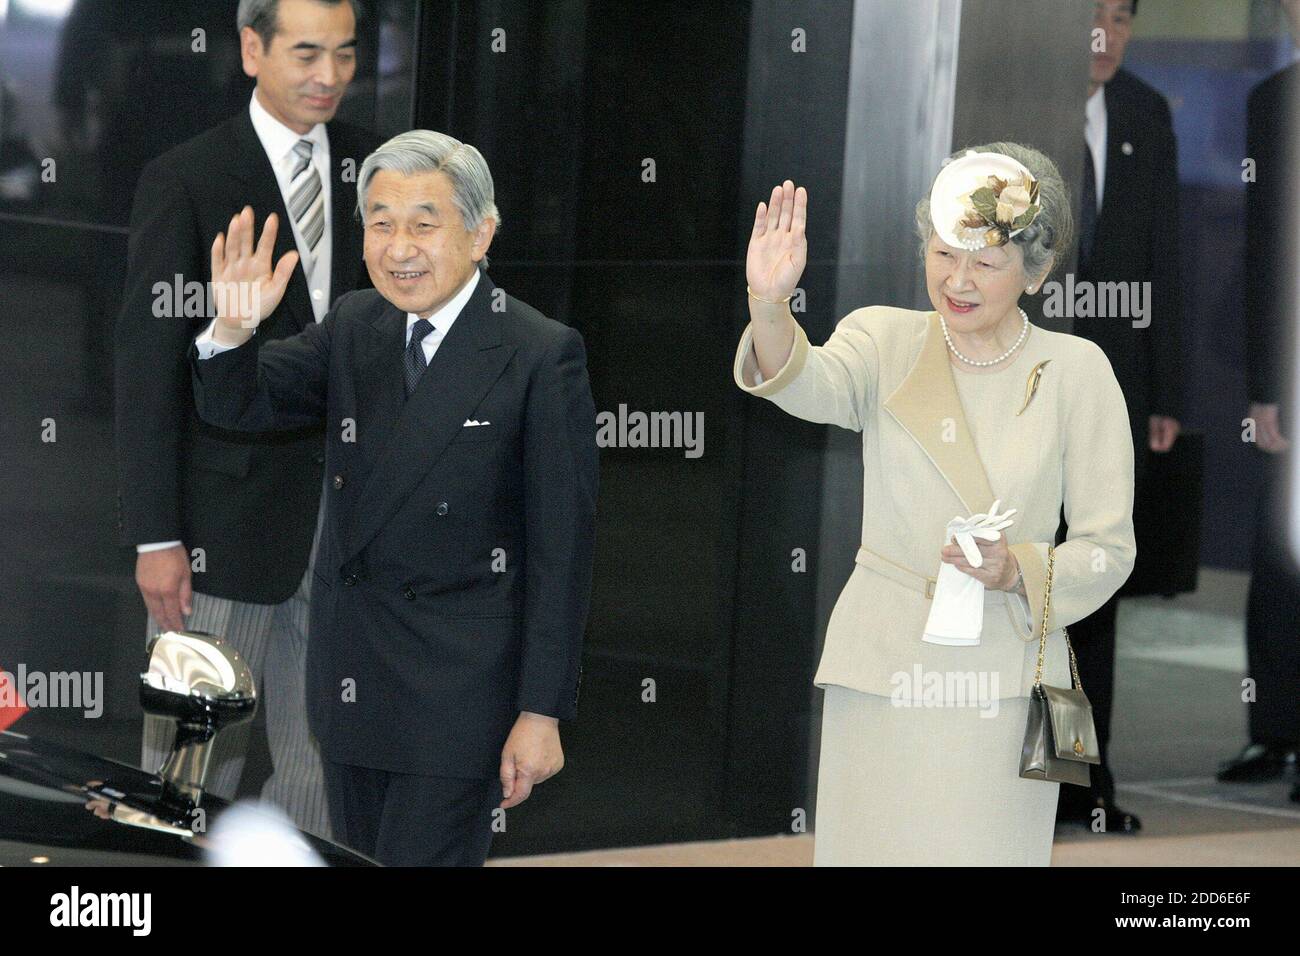 NO FILM, NO VIDEO, NO TV, NO DOCUMENTARY - The Emperor and Empress wave to a crowd celebrating the birth of a new prince while heading for an academic meeting in Sapporo on Wednesday. Princess Kiko, daughter-in-law to Emperor Akihito, gave birth to a 5.64-pound healthy boy on Spetember 6, 2006, the first male child born in the imperial family since 1965. The birth silenced debate over whether Japan should let females ascend to the throne after 125 unbroken generations. Photo by Yomiuri Shimbun/MCT/ABACAPRESS.COM Stock Photo